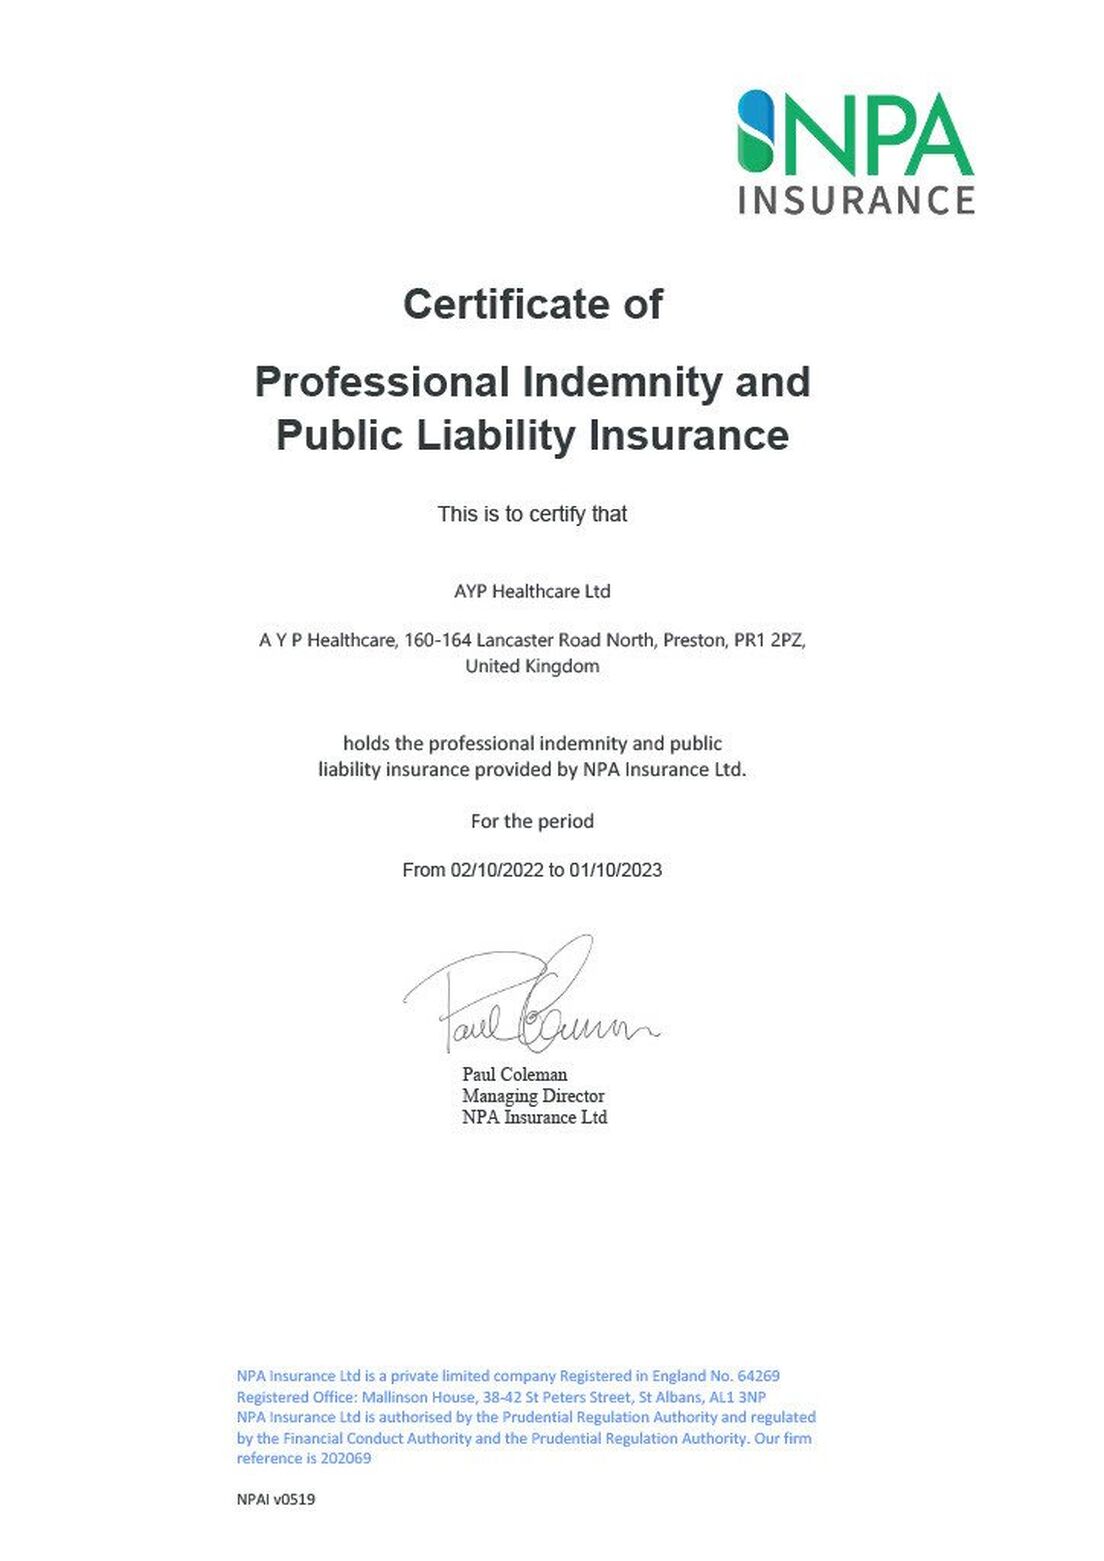 Indemnity Insurance Certificate